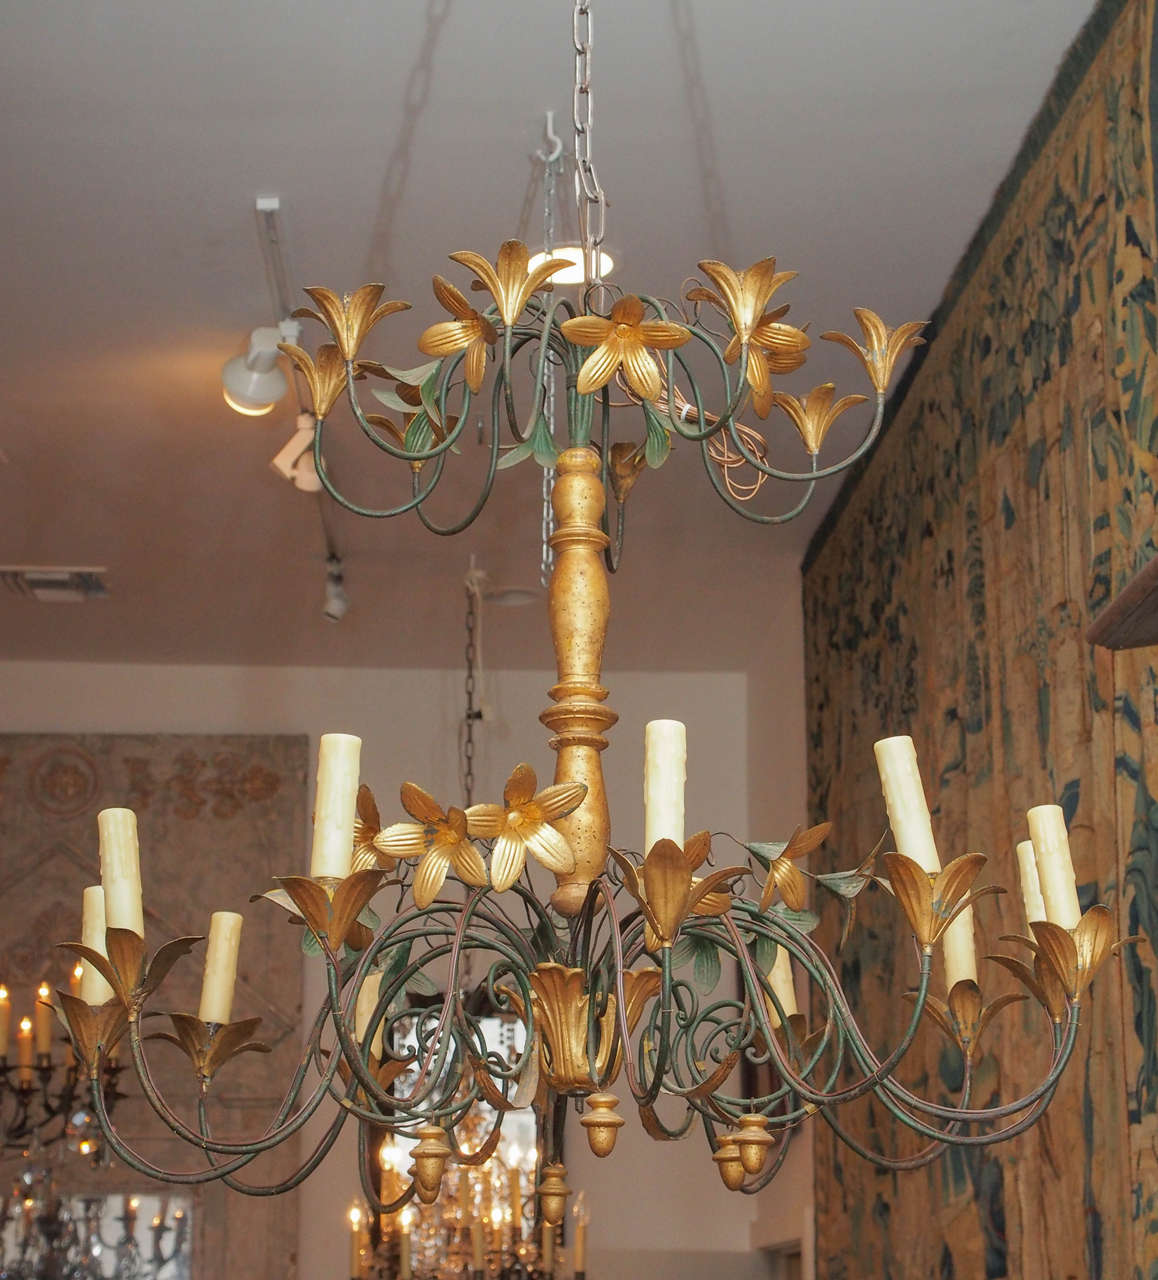 A 19th century gilt iron and tole chandelier with a turned and gilded central support, iron arms and tole flowers. Having two tiers of candle holders, on the lower tier wired.  Acorn shaped gilded finials suspended from the lower arms.